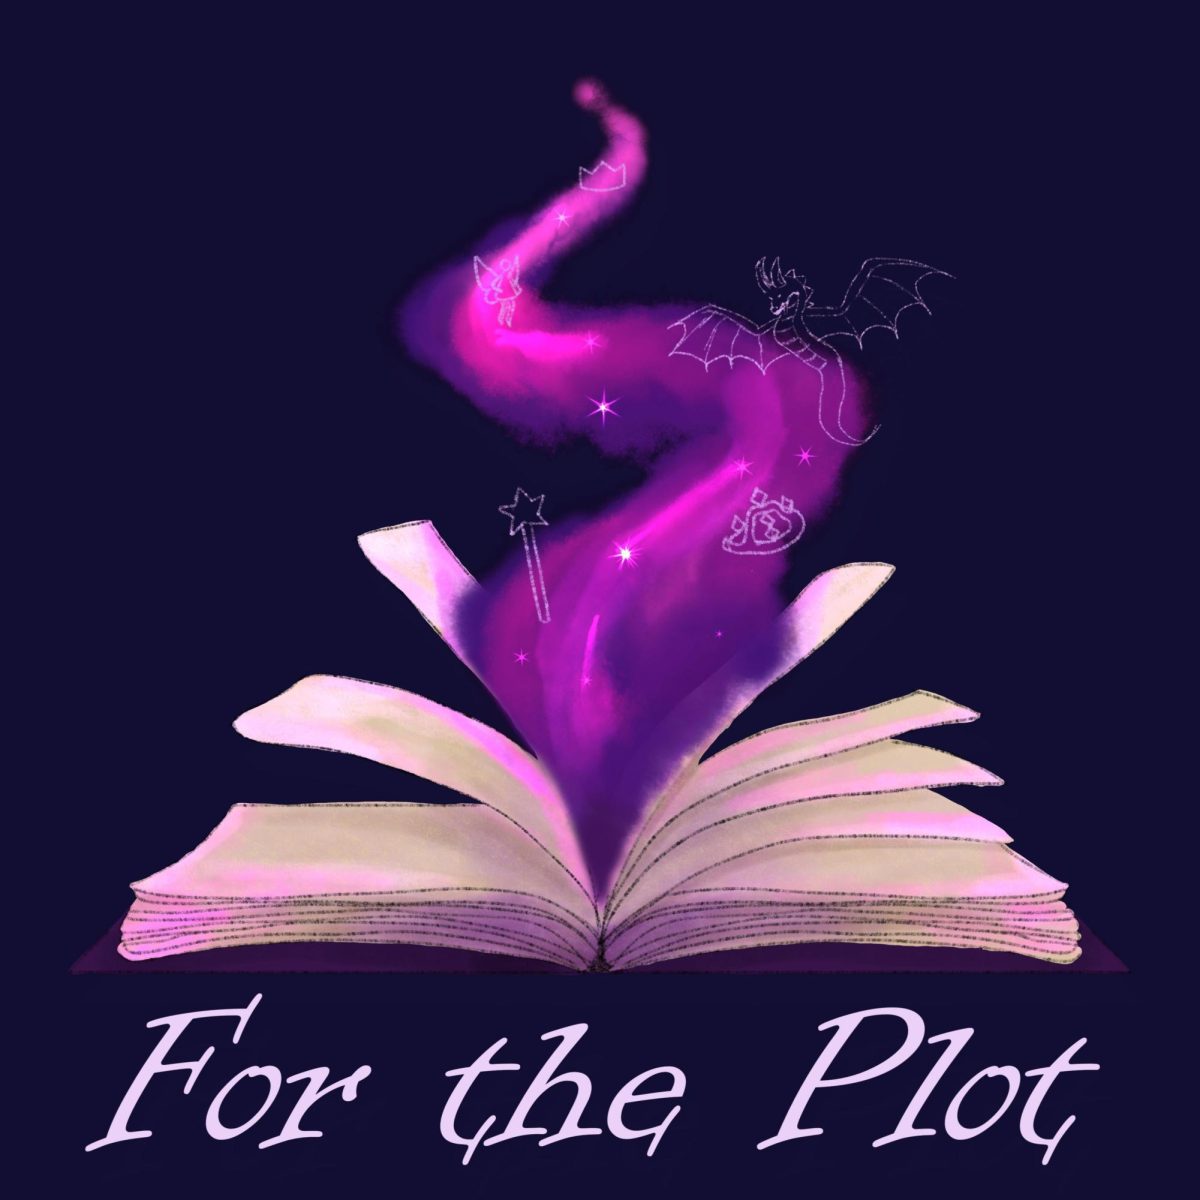 For+the+Plot+%7C+%E2%80%98Vipers+and+Virtuosos%E2%80%99+review